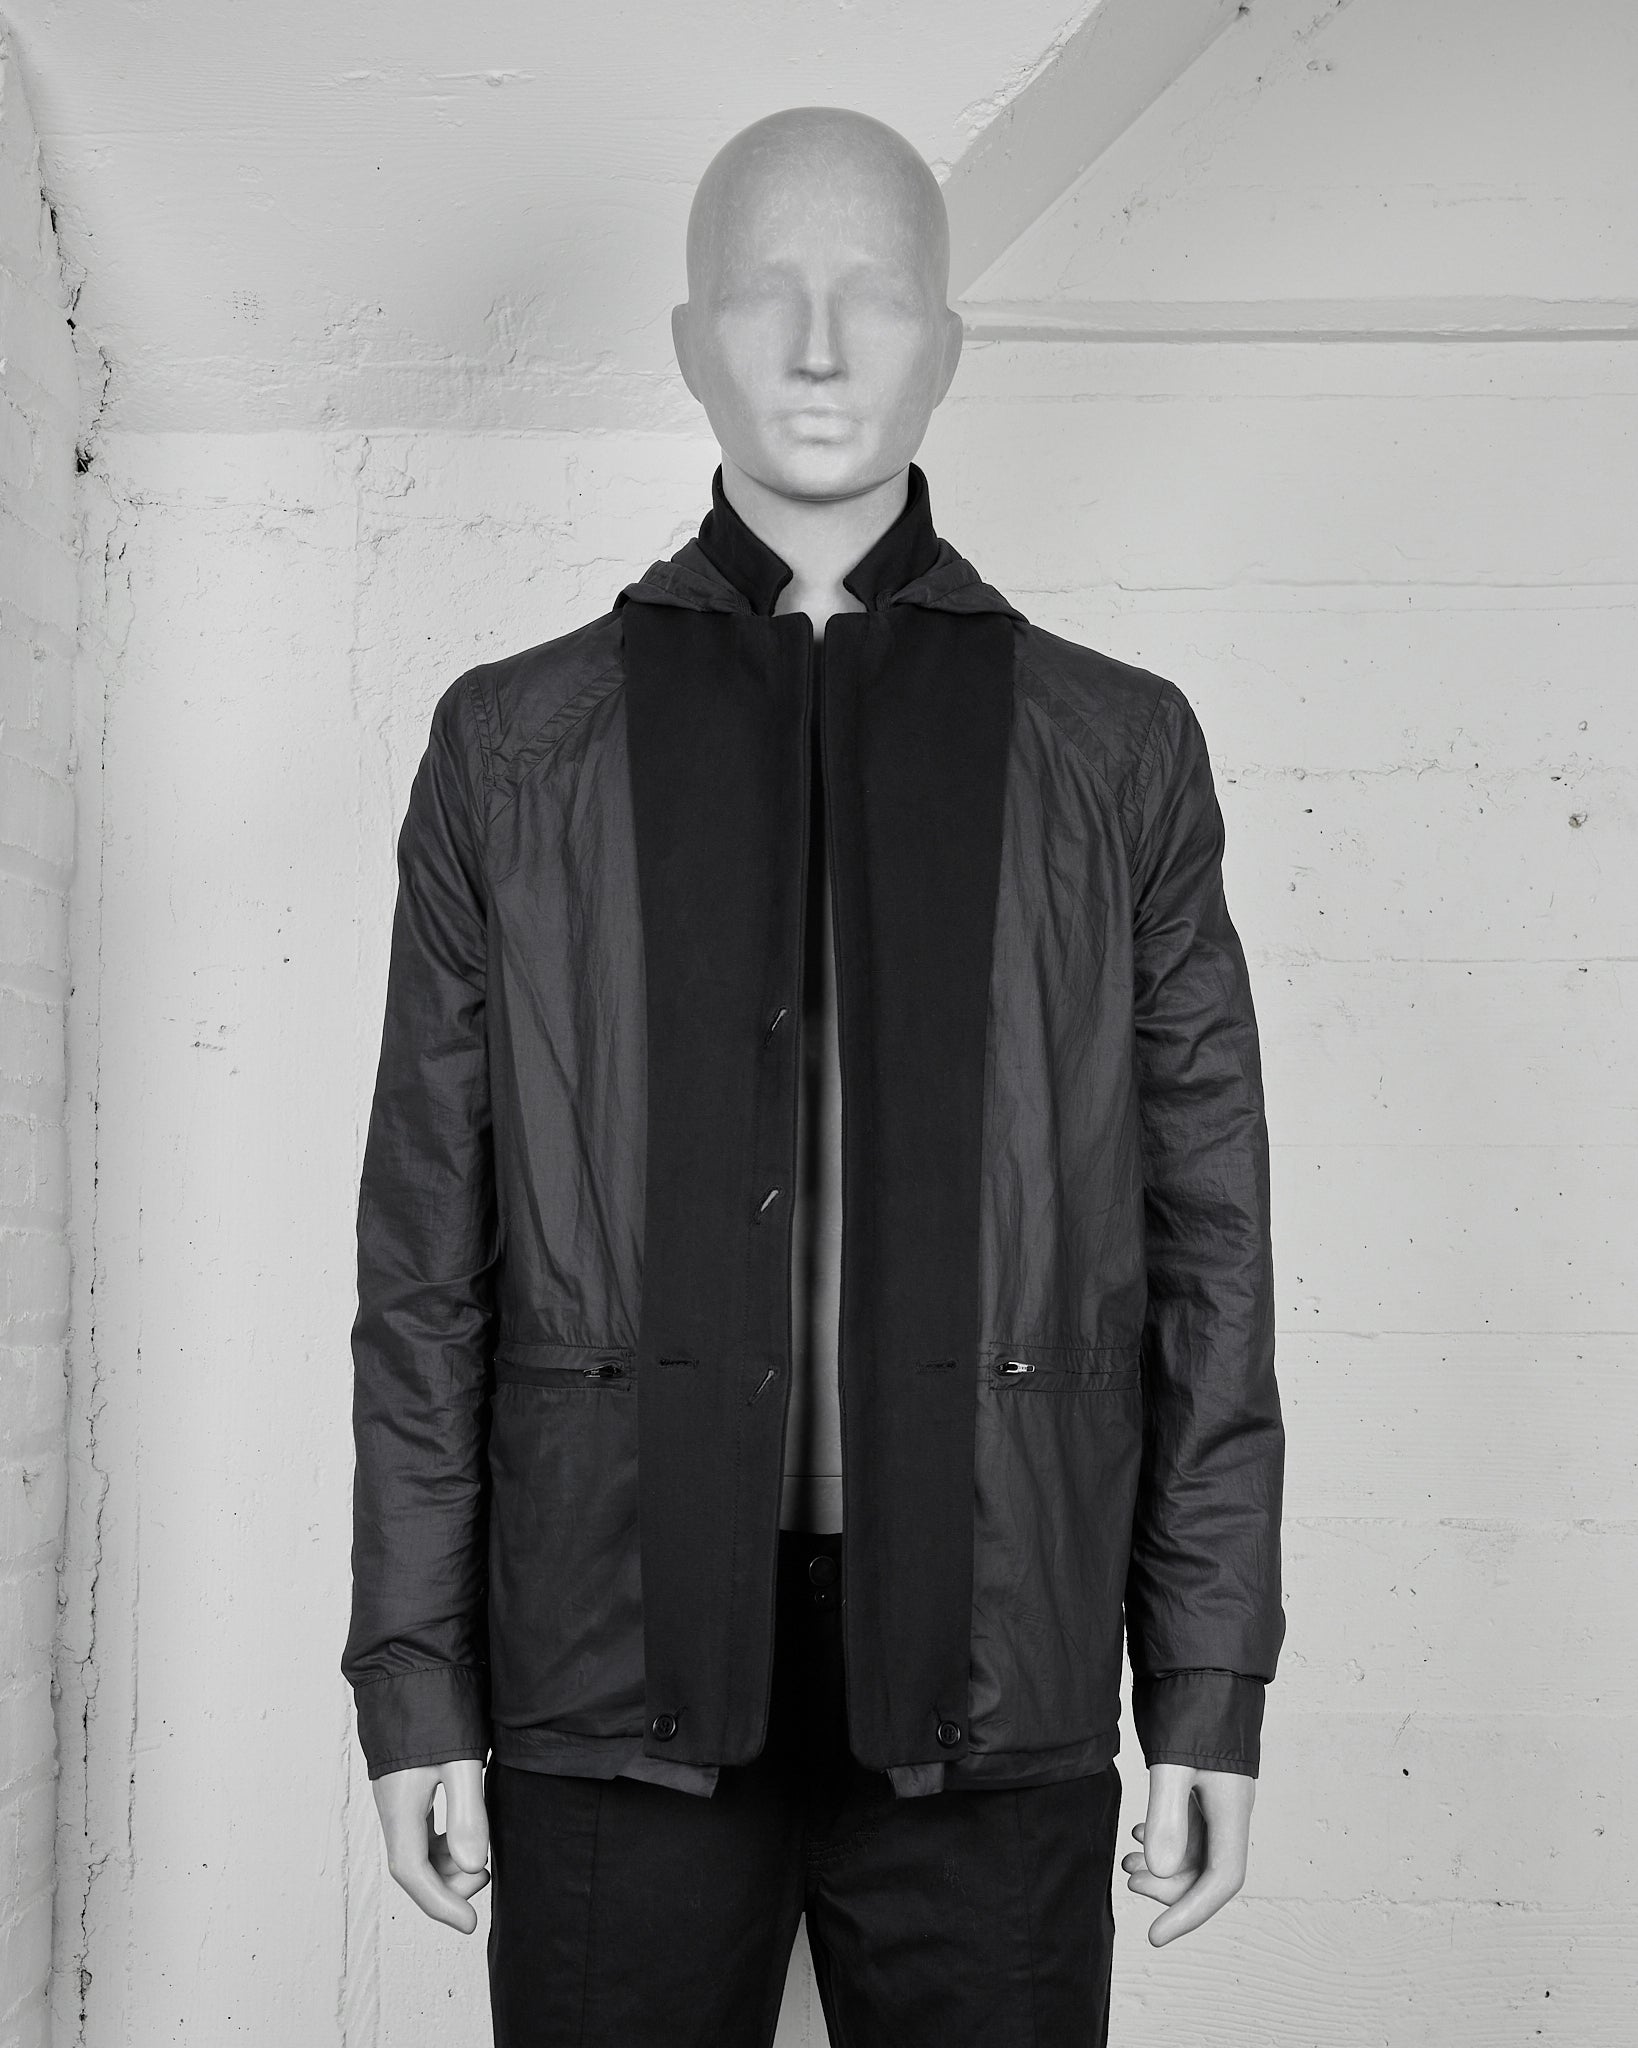 Hussein Chalayan Reversible Jacket - AW05 "In Shadows" open jacket detail 2